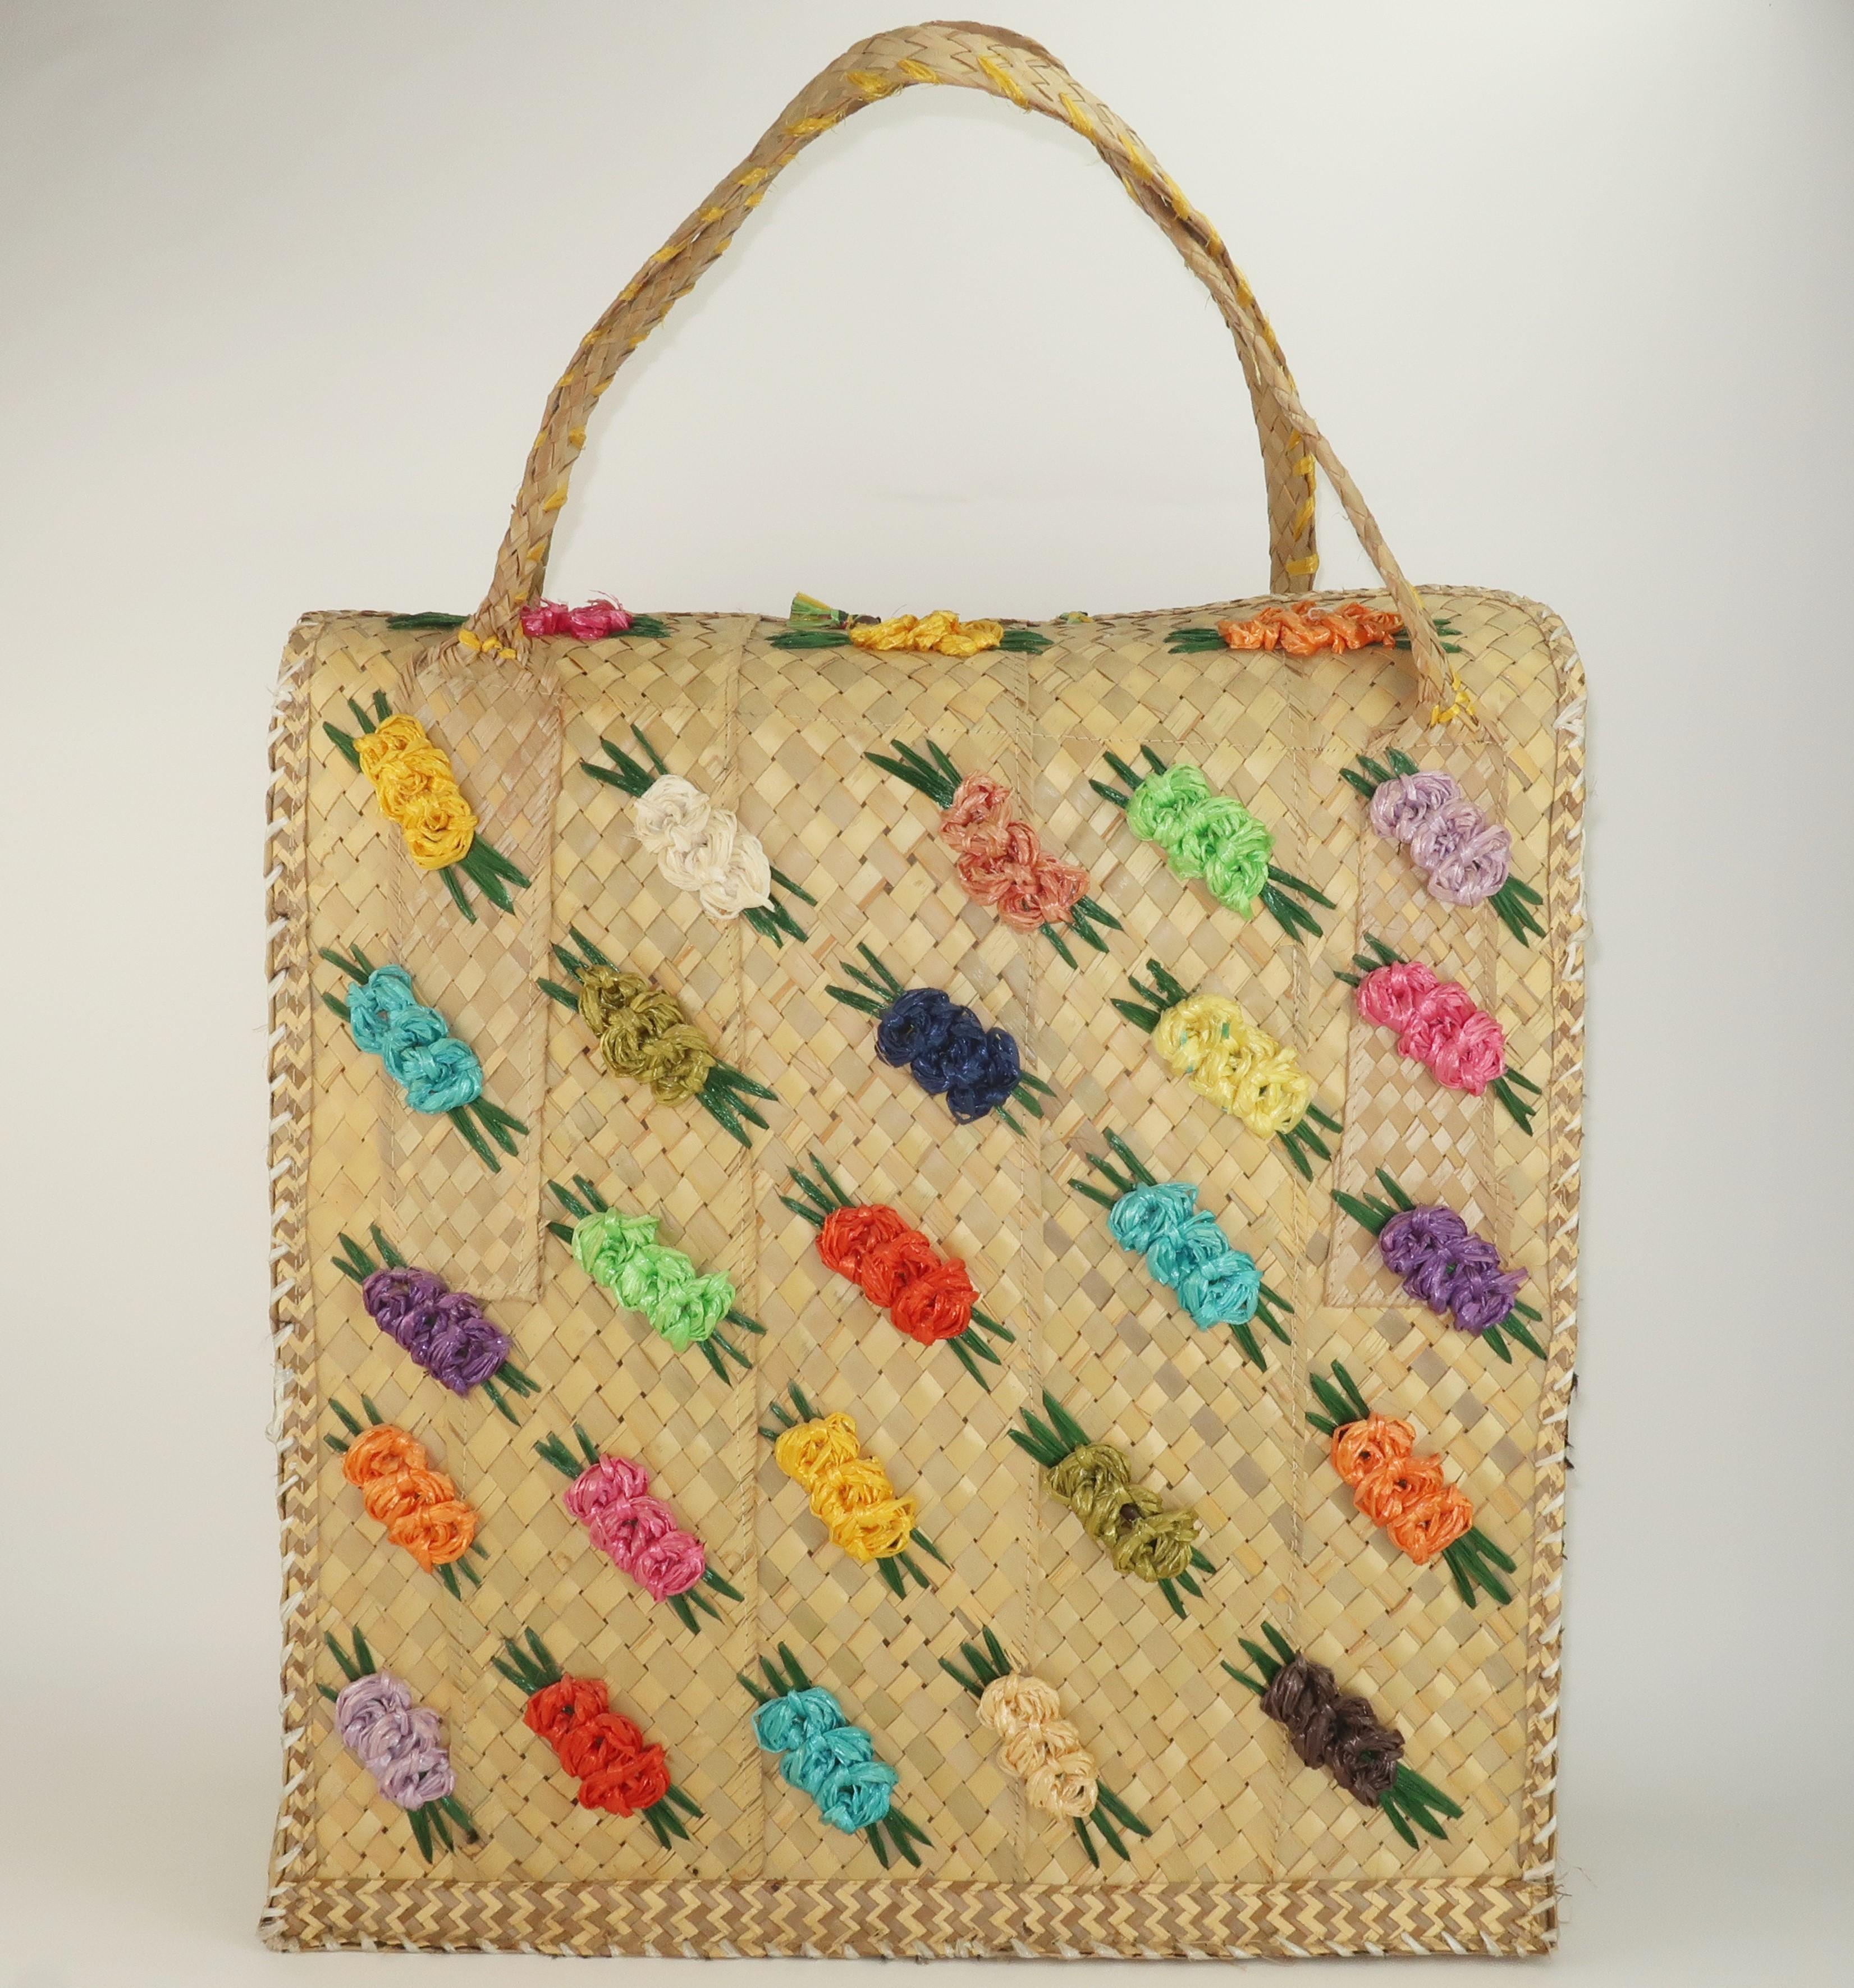 Get ready for a day at the beach with a colorful vintage straw bag in an extra large size perfect for toting towels, snacks and sunscreen!  This vintage bag has a suitcase shape with raffia floret decorations in shades of green, pink, blue, yellow,